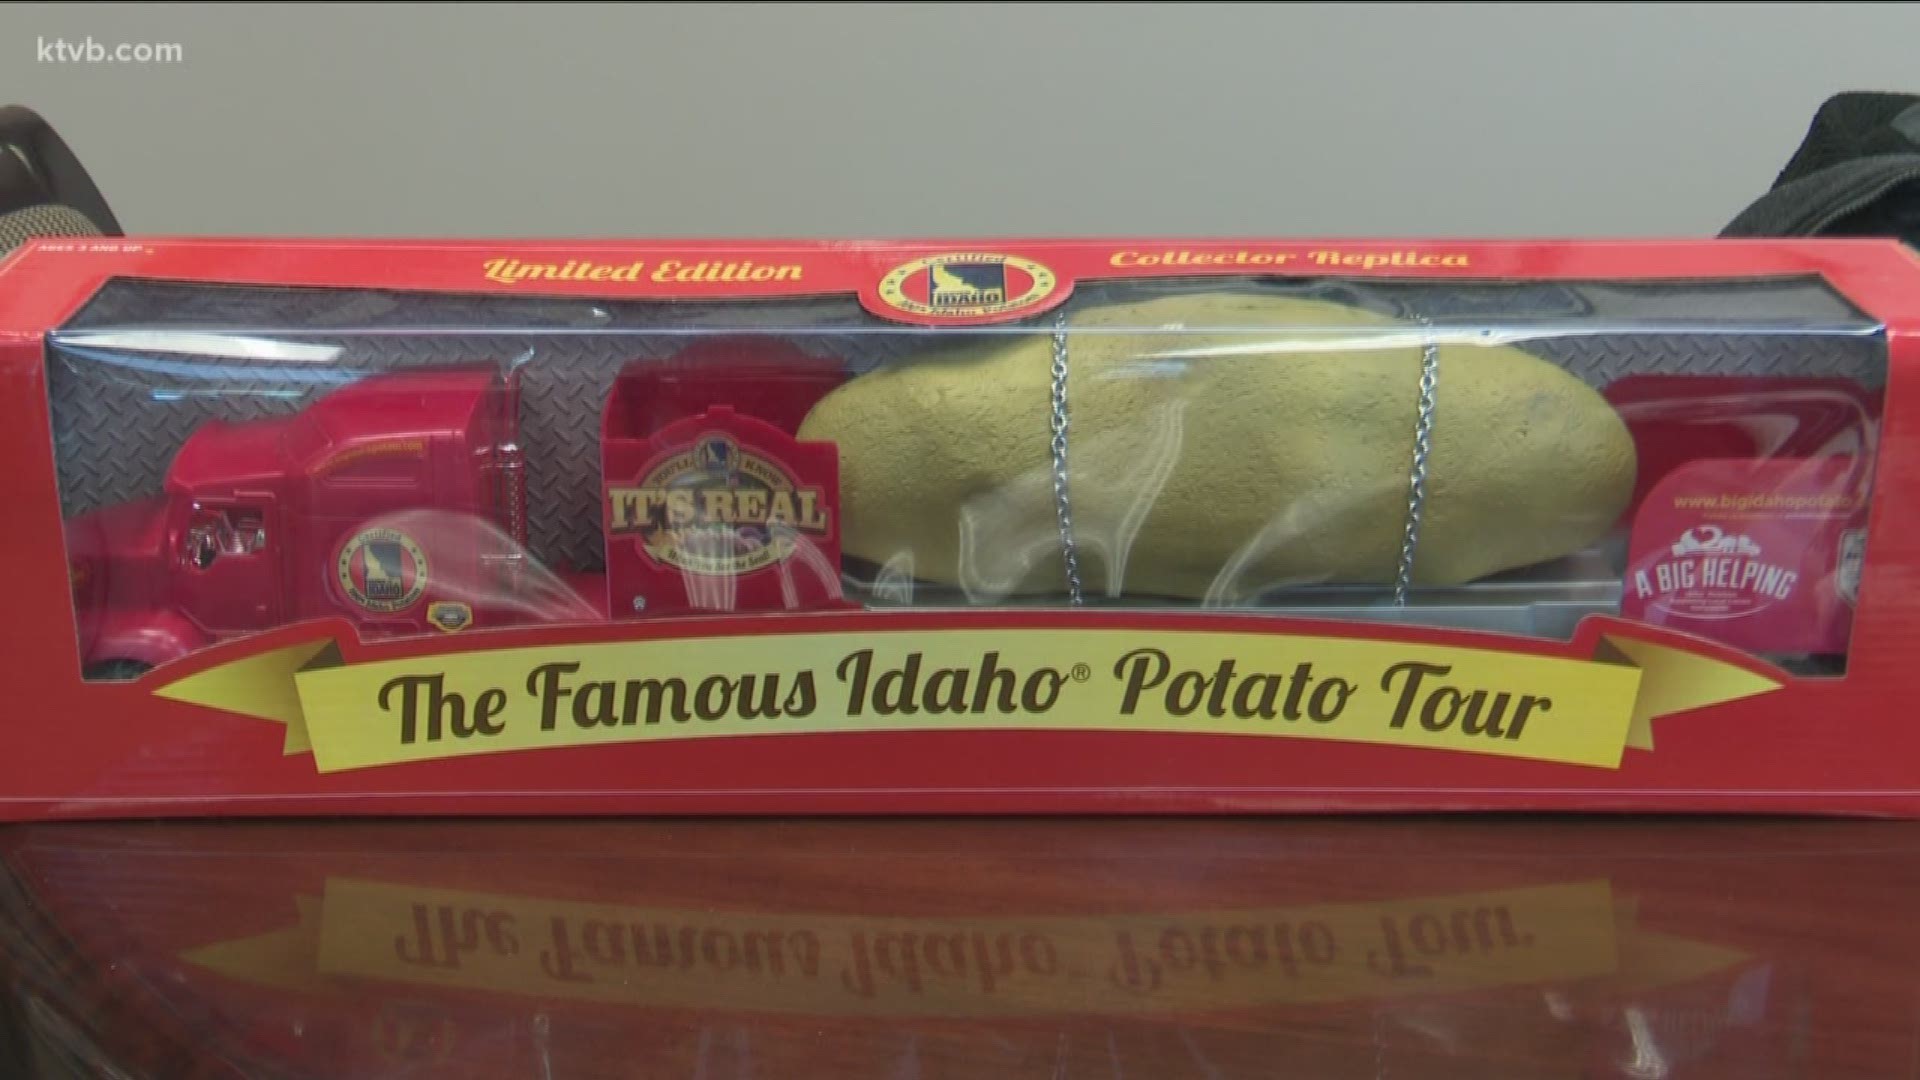 "The fact that Kobe was celebrated as a hero in keeping the truck, that’ll always one of my favorite memories of the Big Idaho Potato Truck,” said CEO Frank Muir.